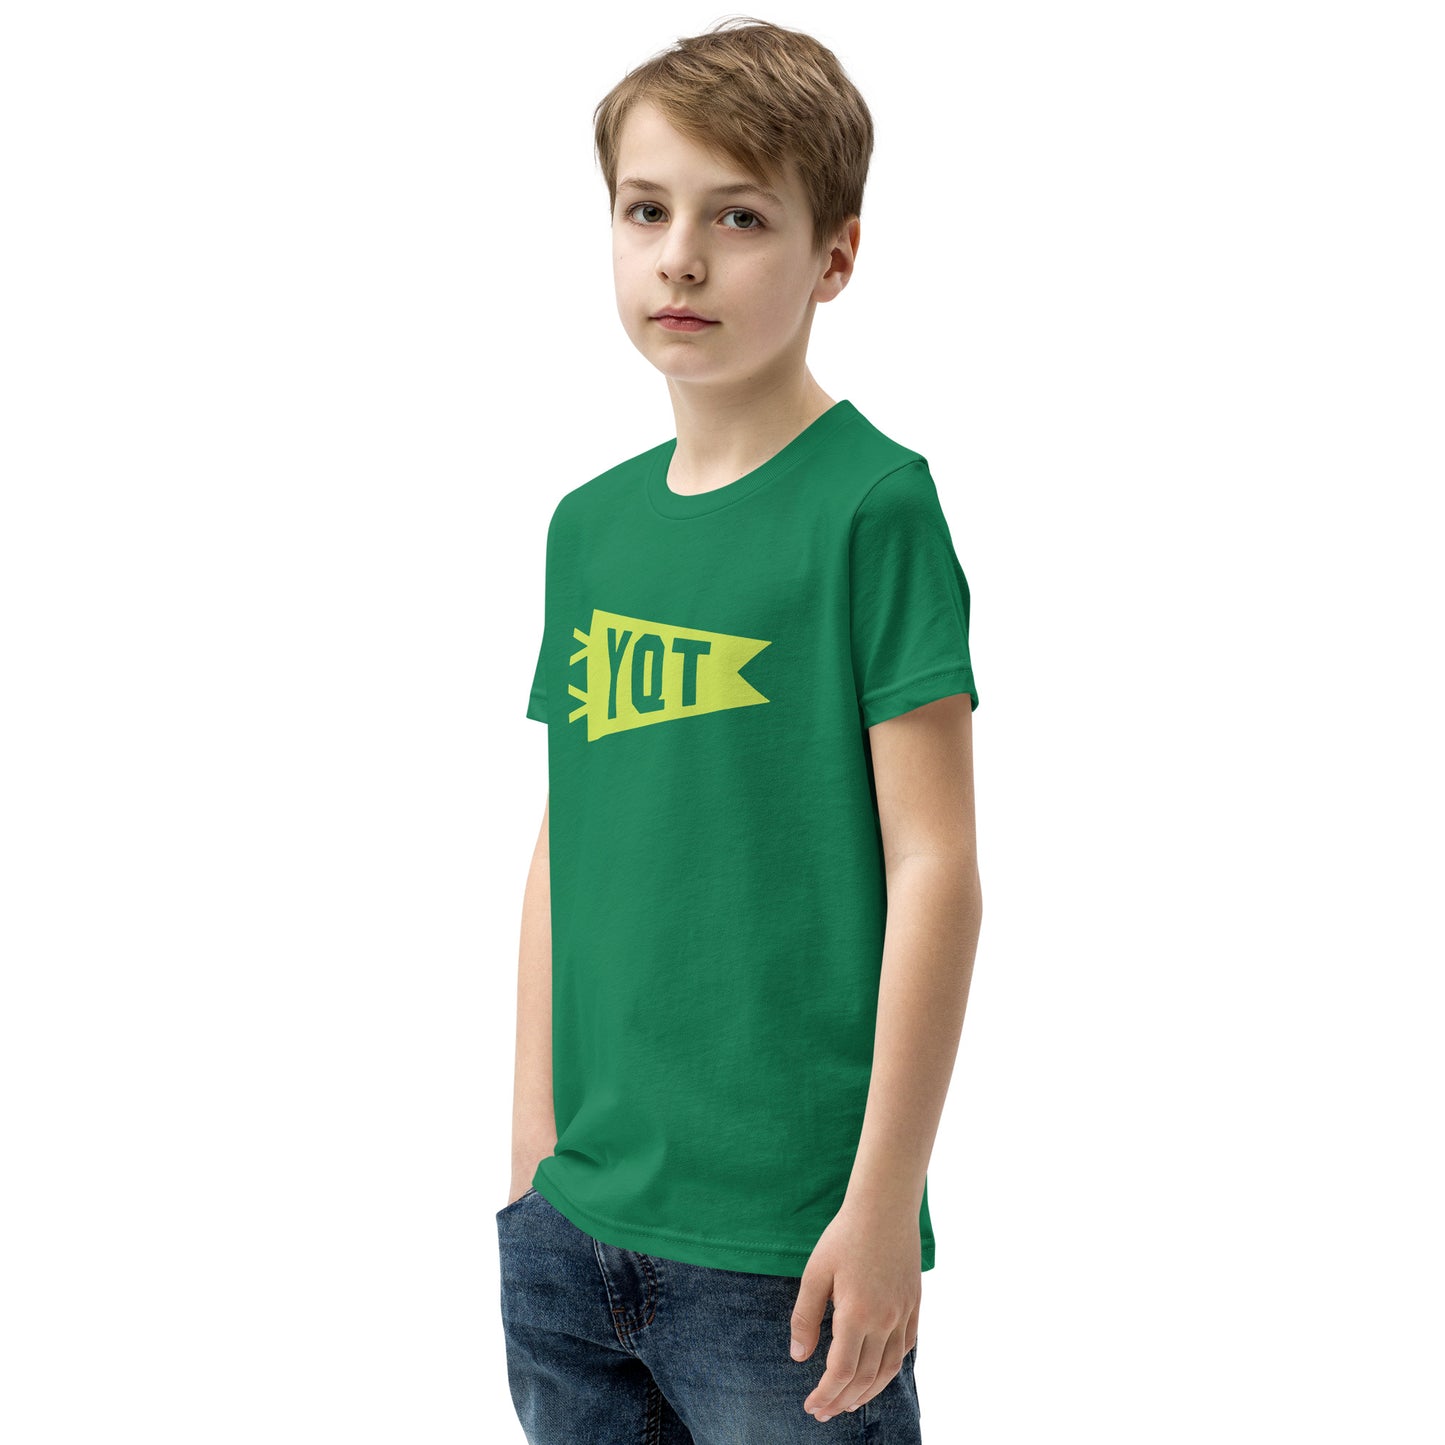 Kid's Airport Code Tee - Green Graphic • YQT Thunder Bay • YHM Designs - Image 06